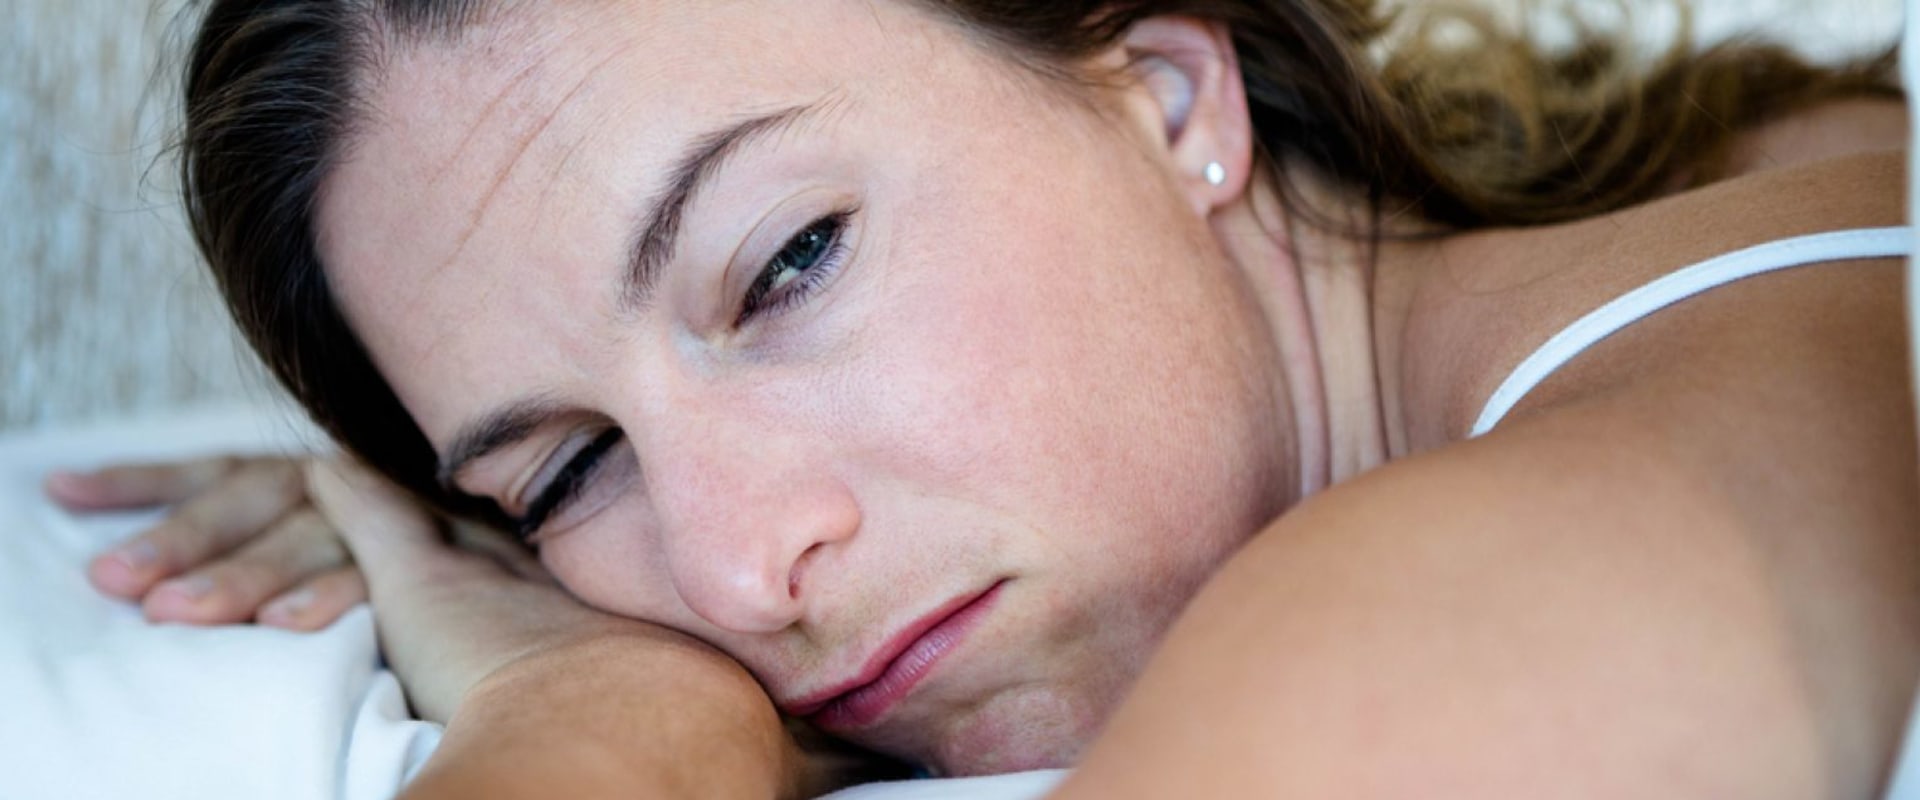 How does lack of sleep affect emotional awareness?